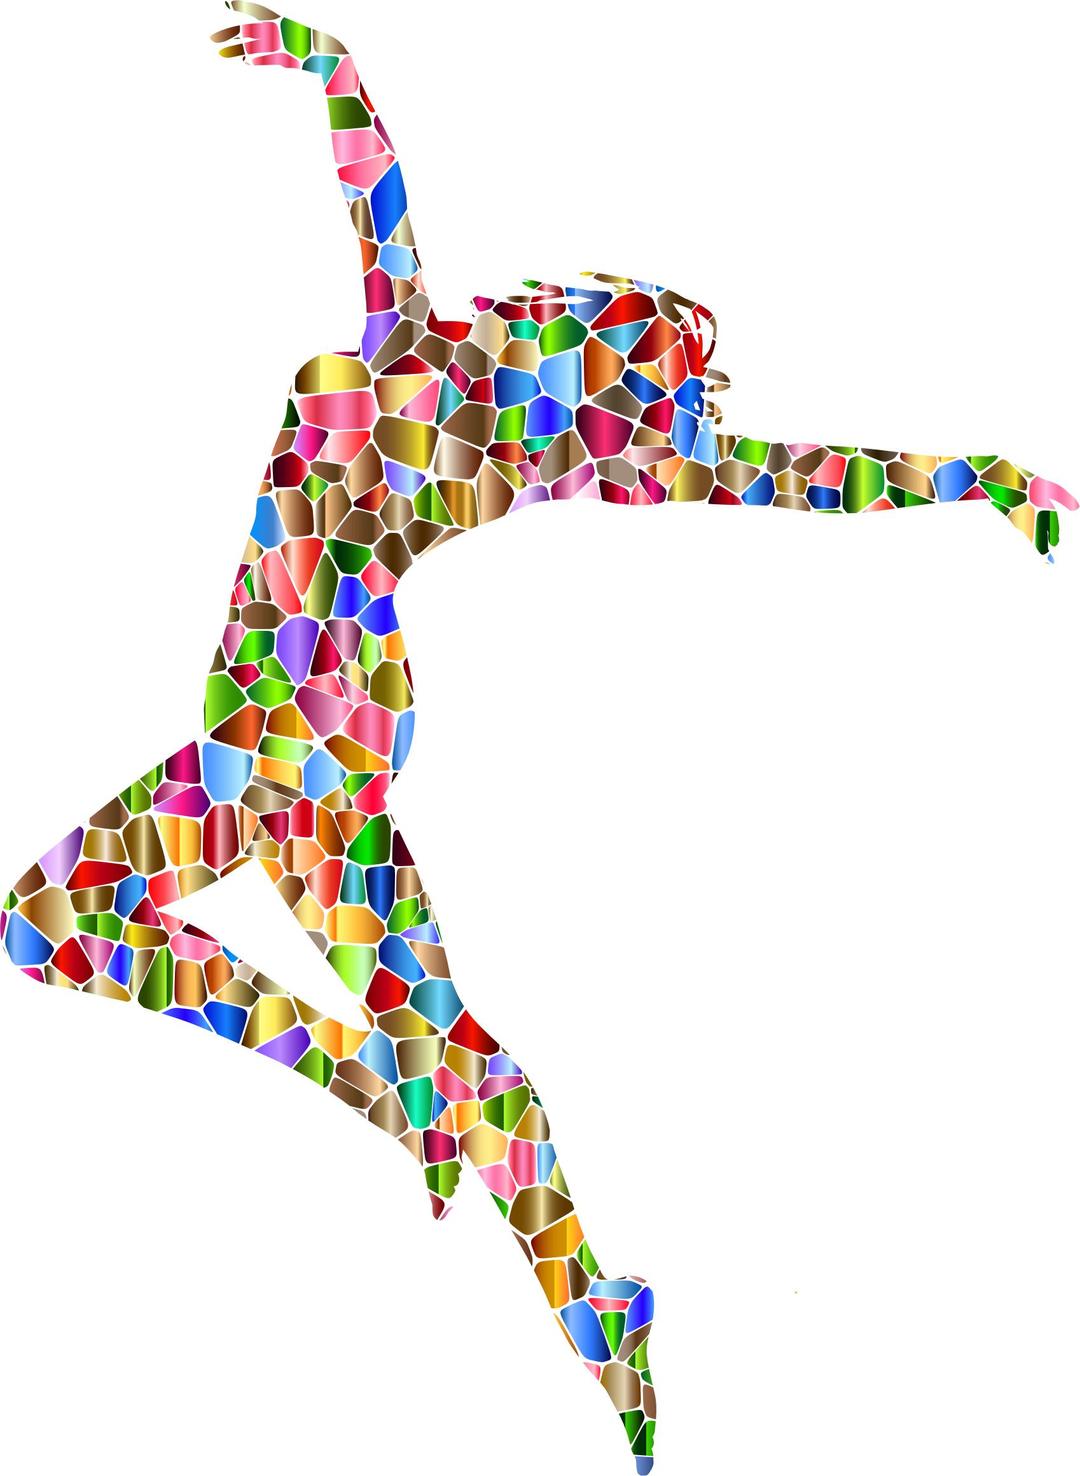 Chromatic Tiled Carefree Dancing Woman Silhouette png transparent